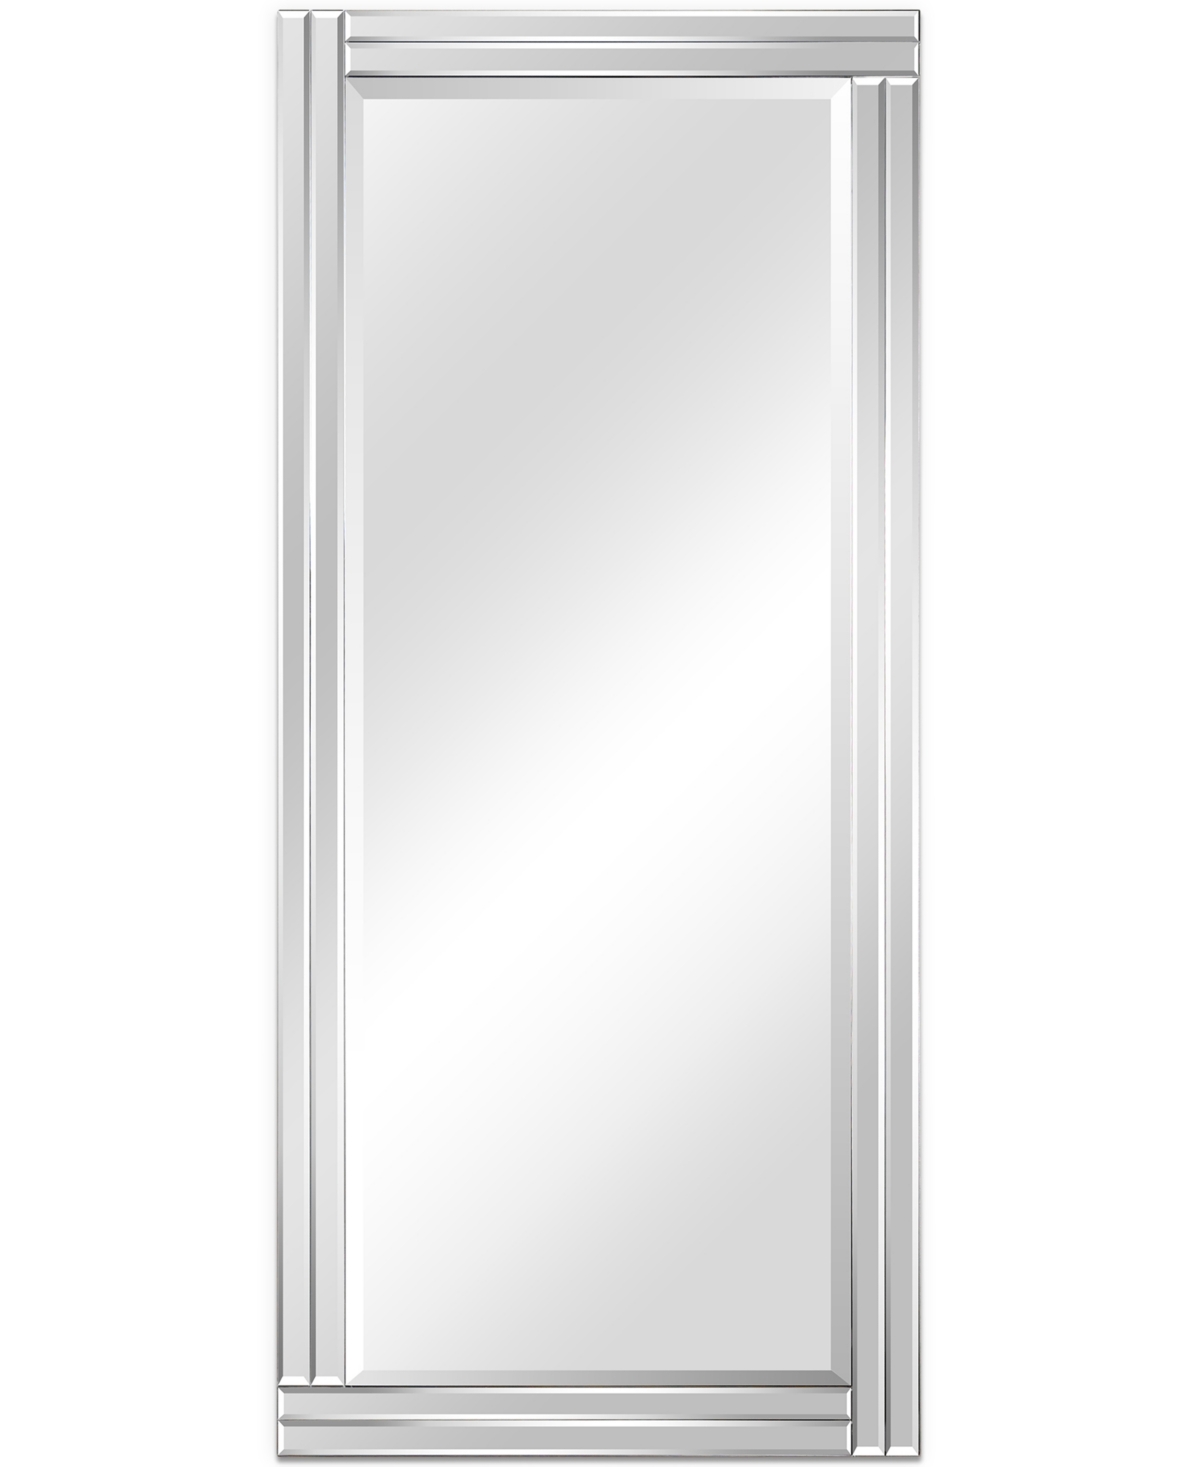 Moderno Stepped Beveled Rectangle Wall Mirror, 54" x 24" x 1.18" - Clear